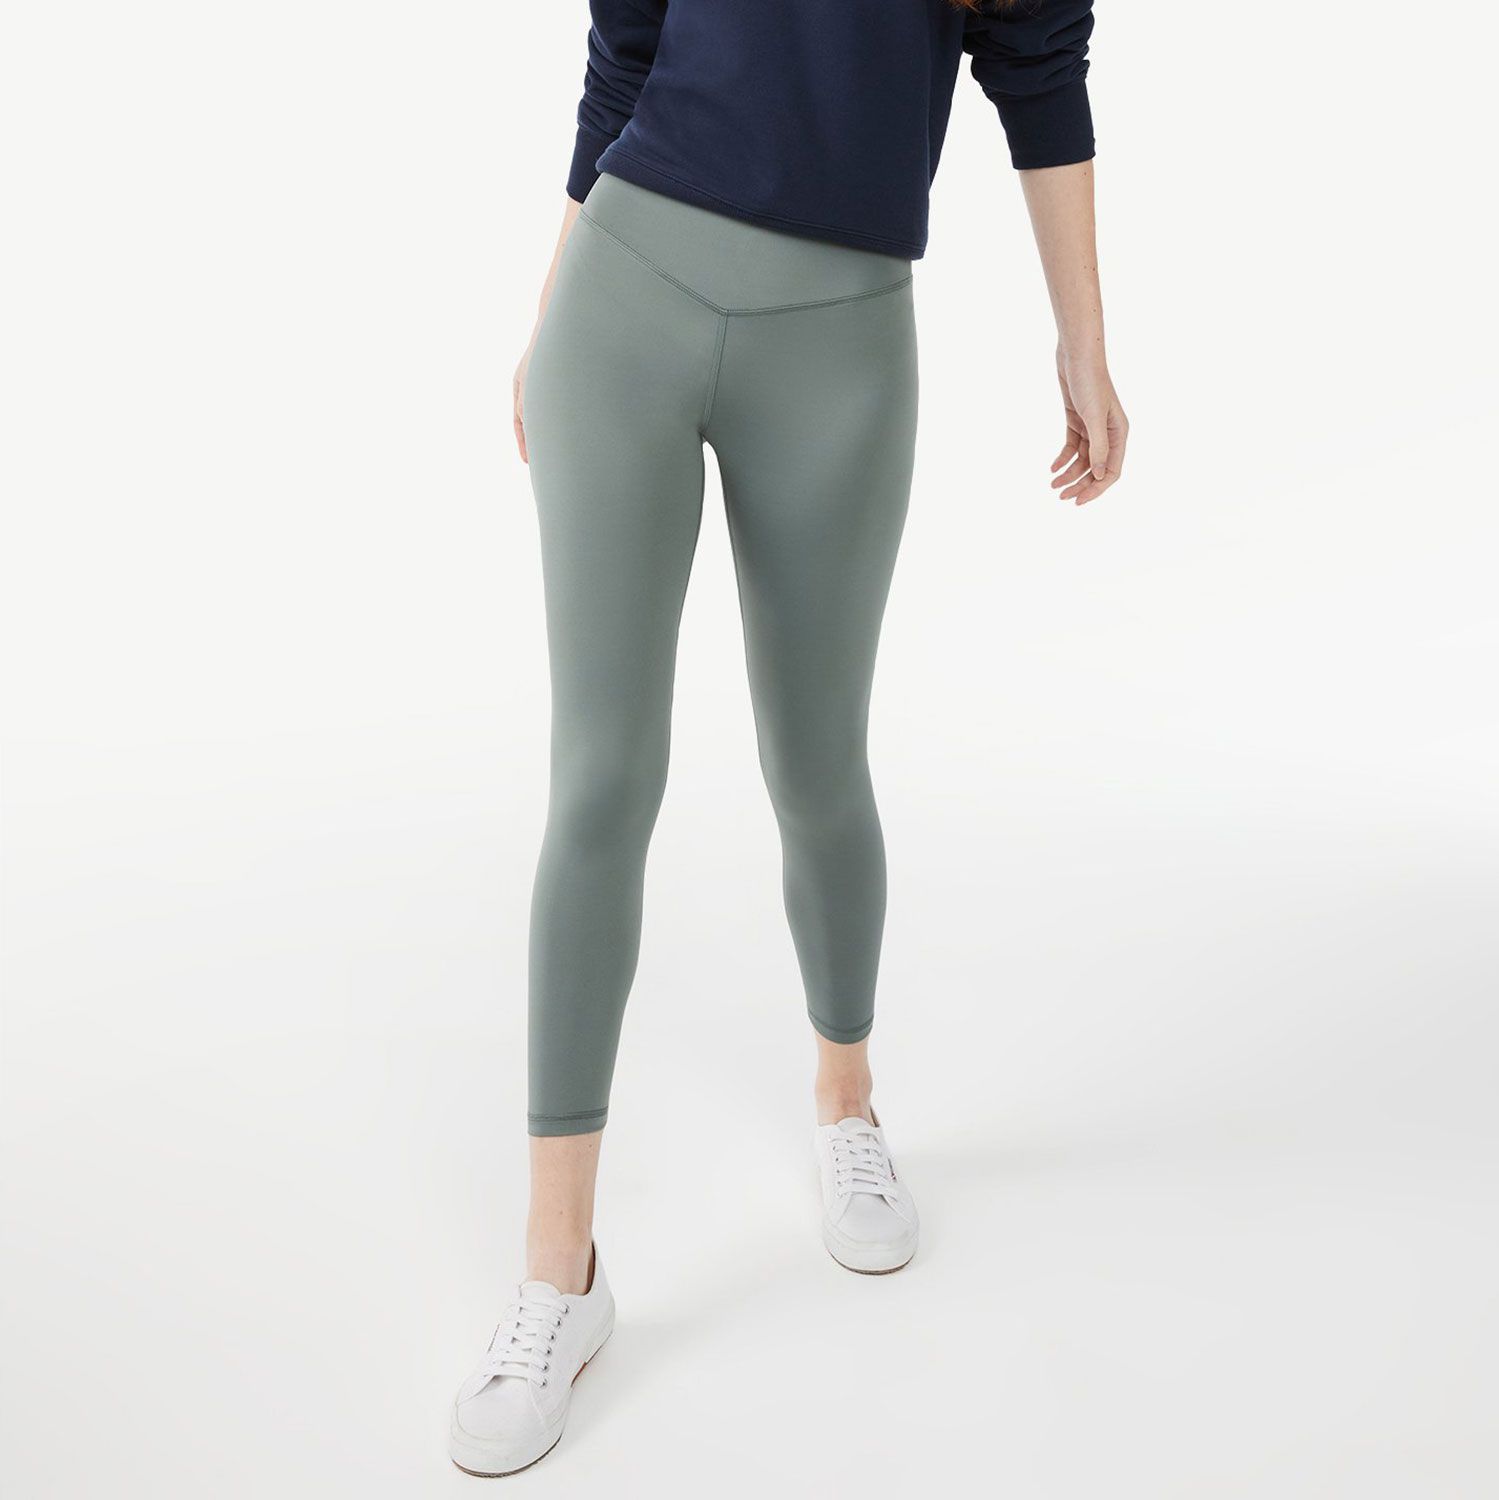 Free Assembly activewear